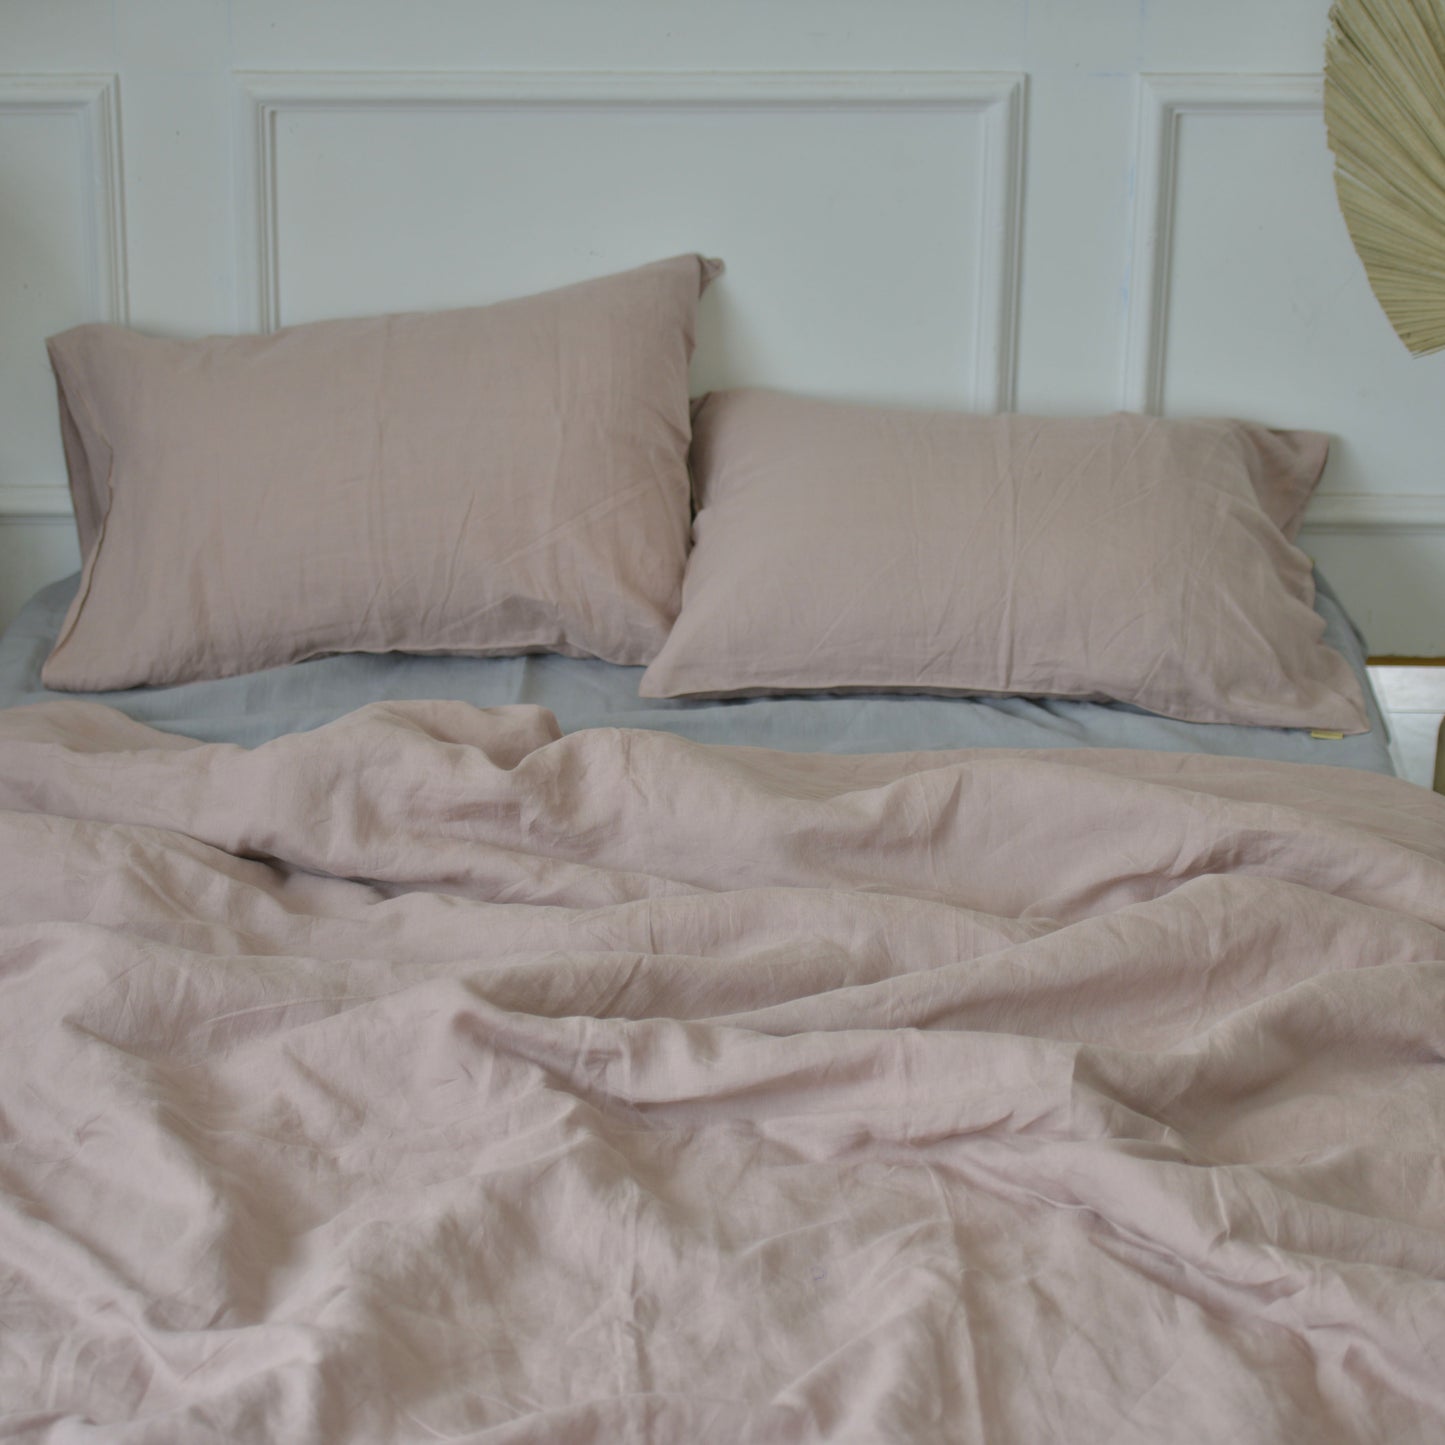 Dusty Pink French Linen Bedding Sets (4 pieces)  - Plain Dyeing